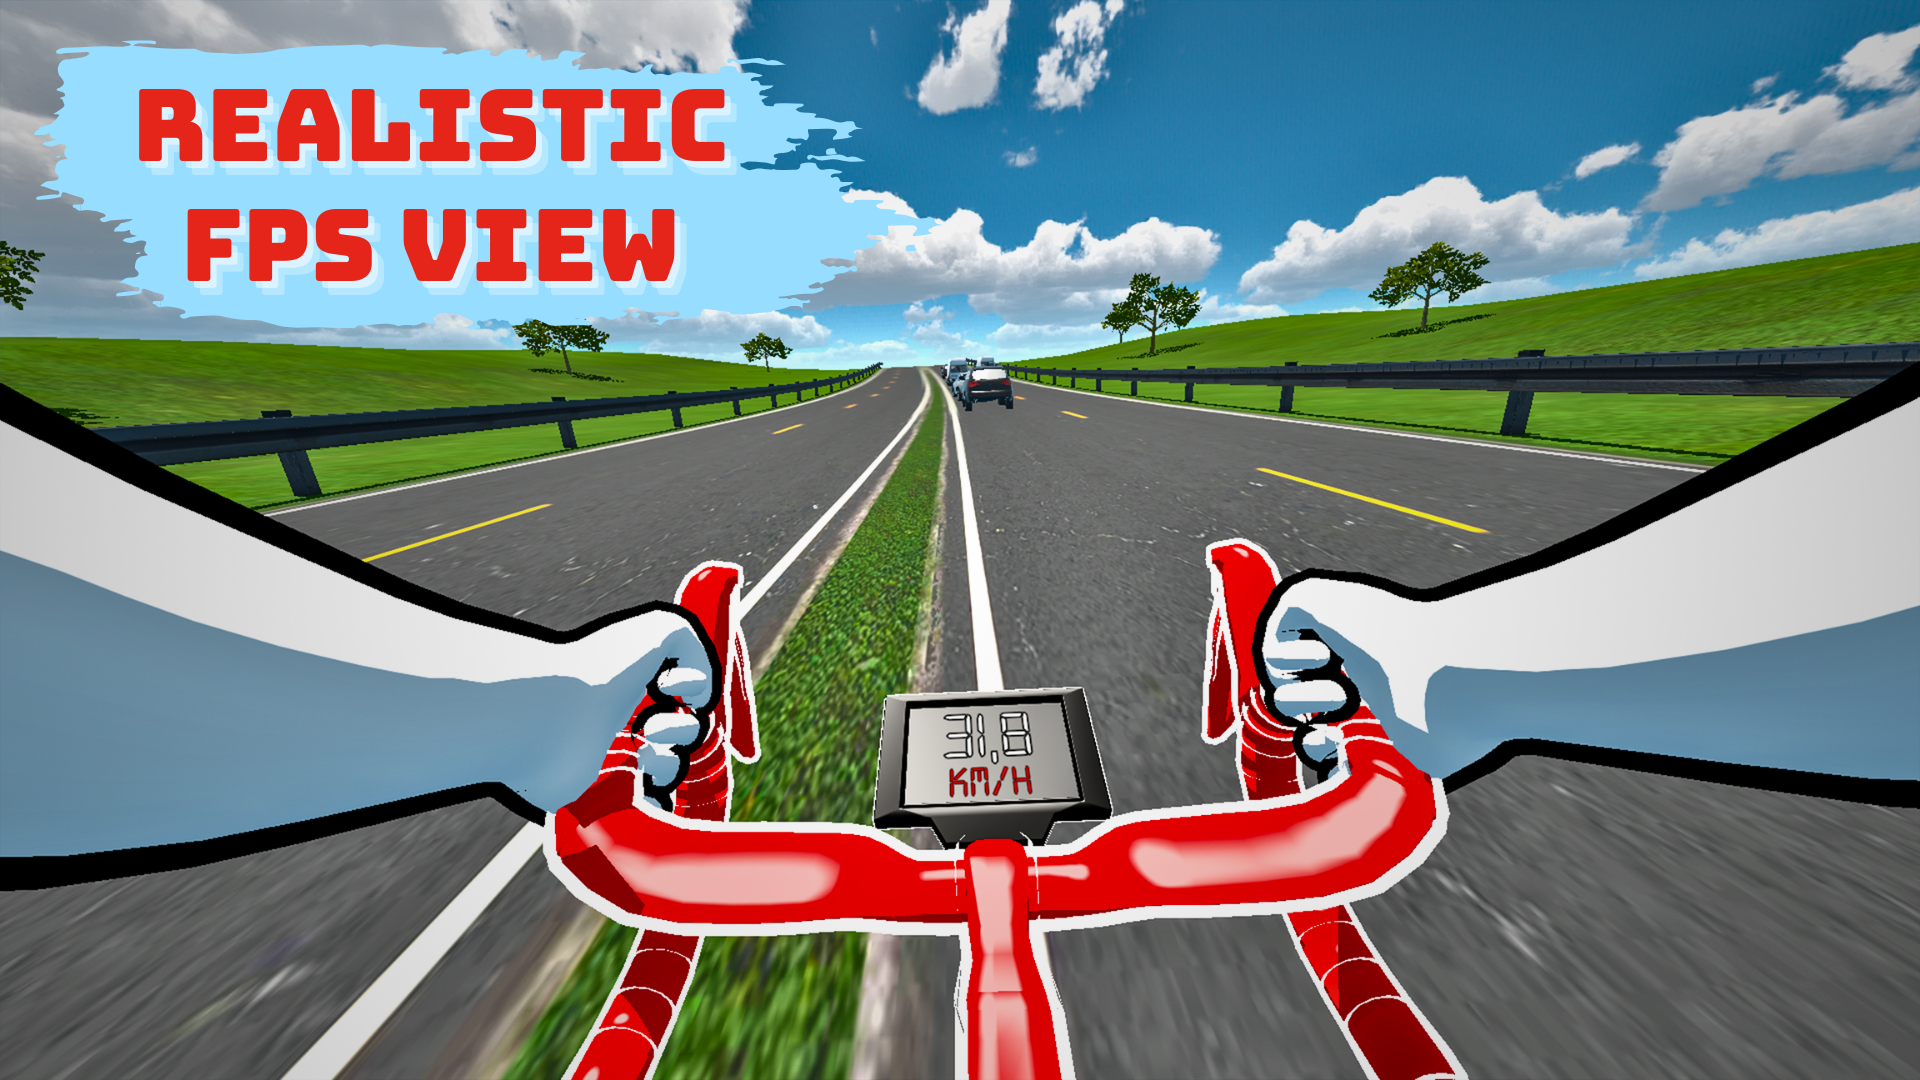 Screenshot 1 of Bicycle Extreme Rider 3D 1.6.3